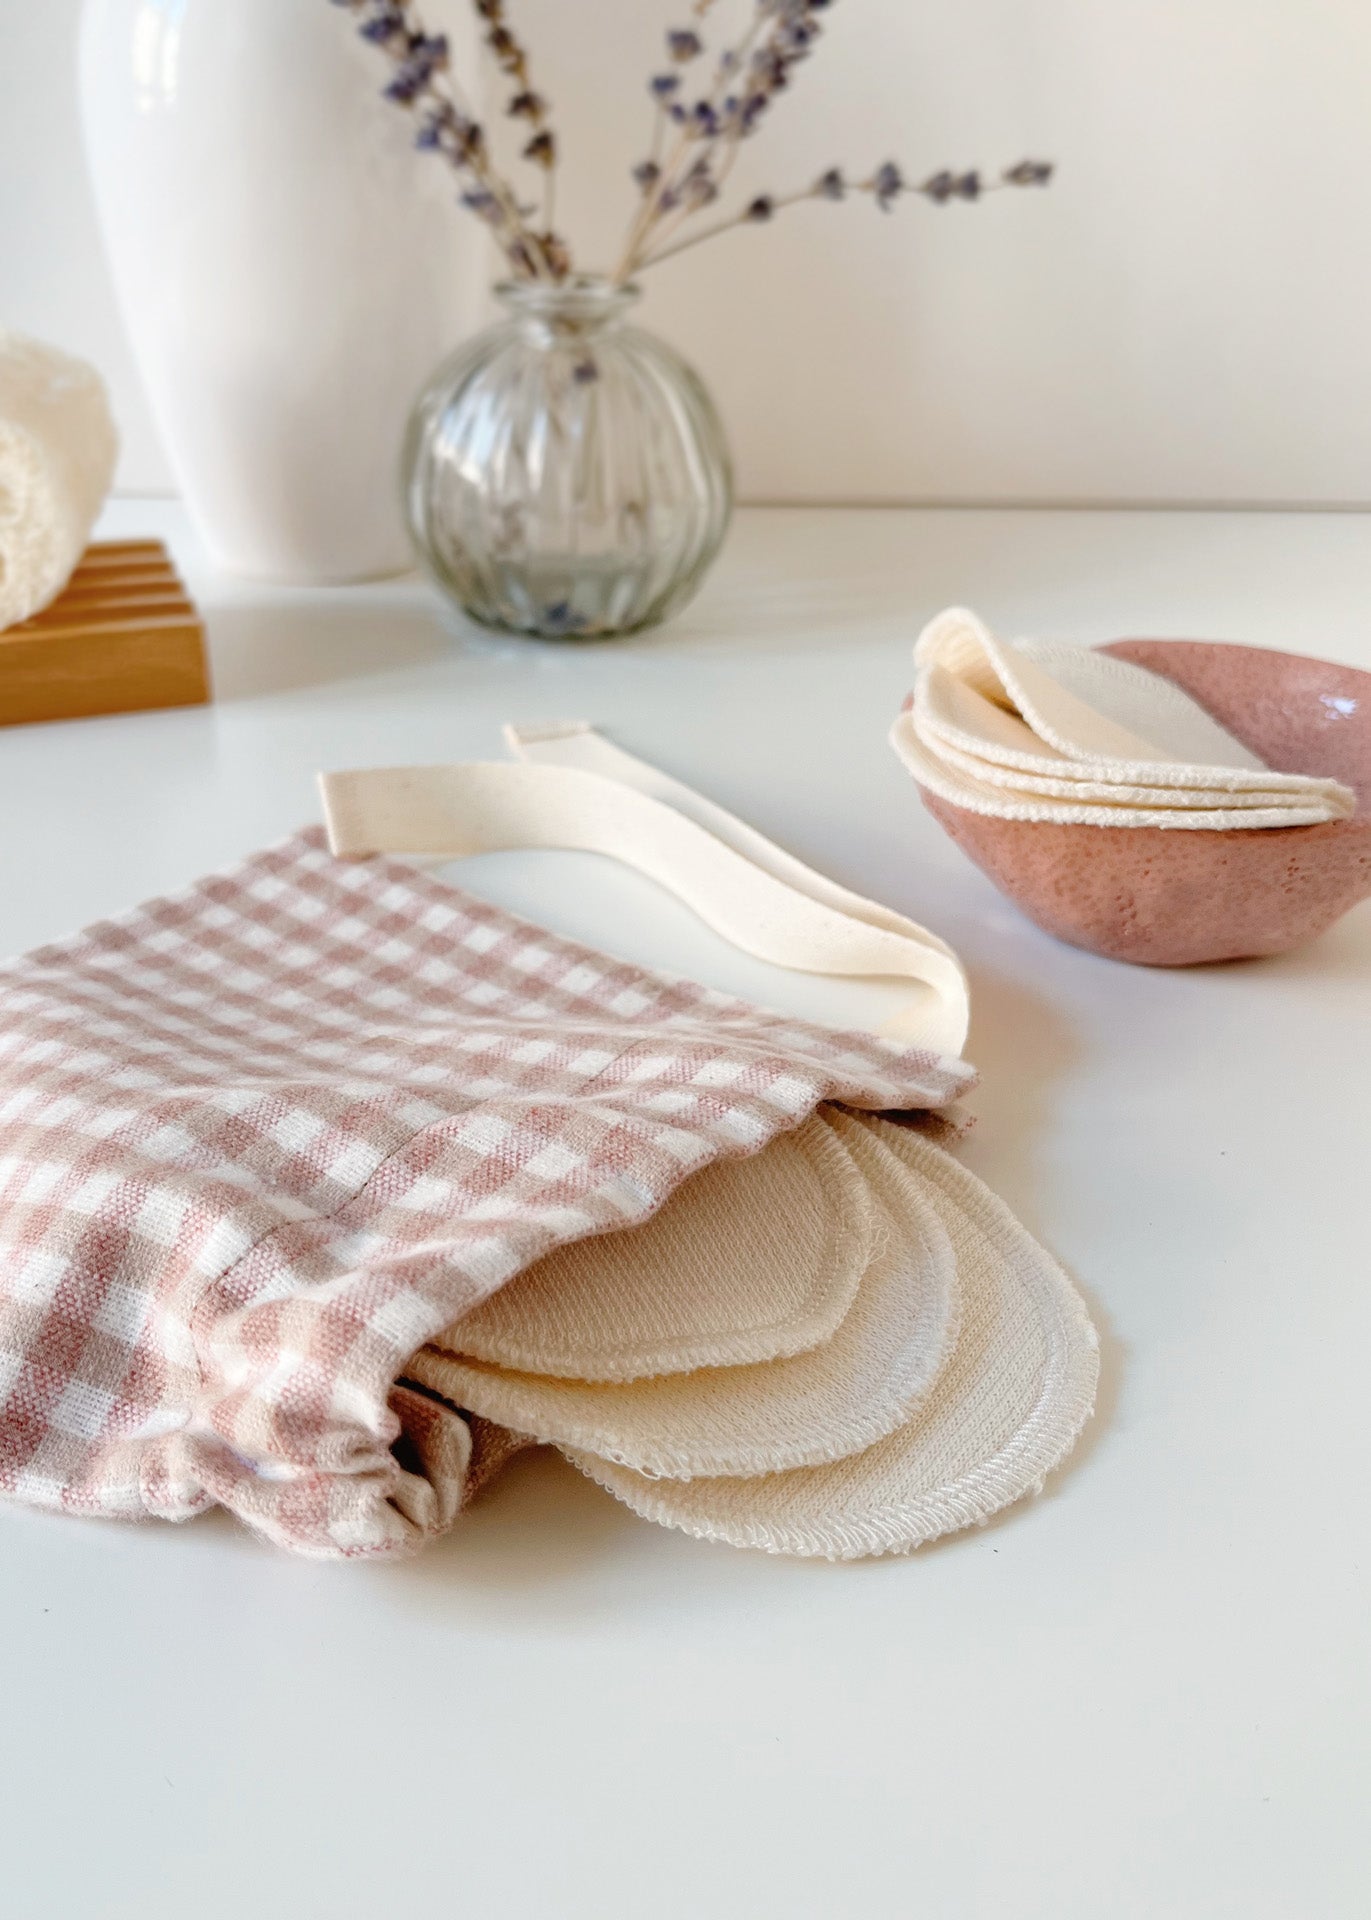 Face Pads & Pouch - Gingham/Ivory Organic Cotton